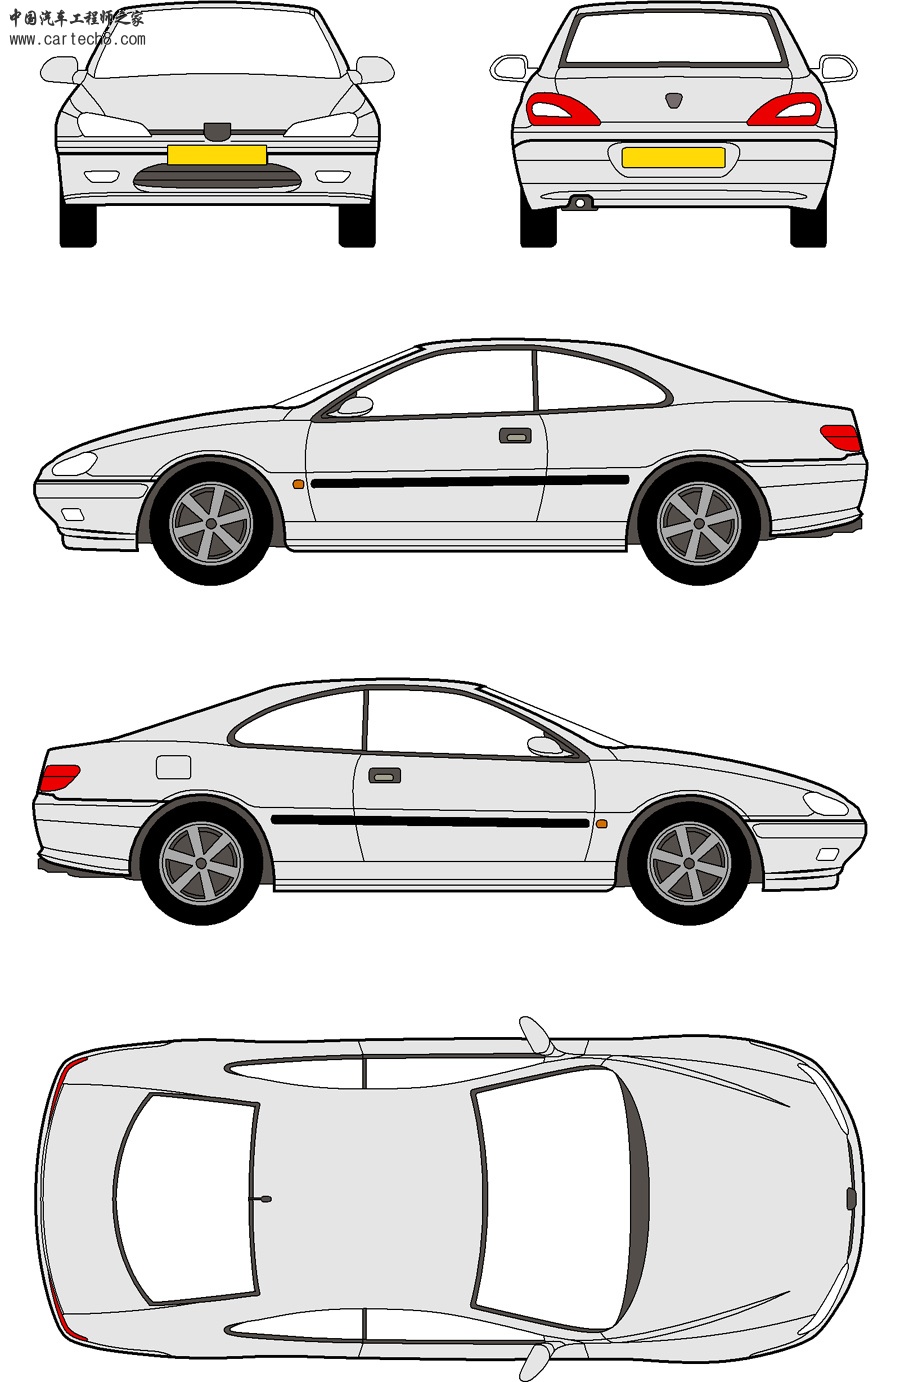 peugeot_406_coupe.jpg